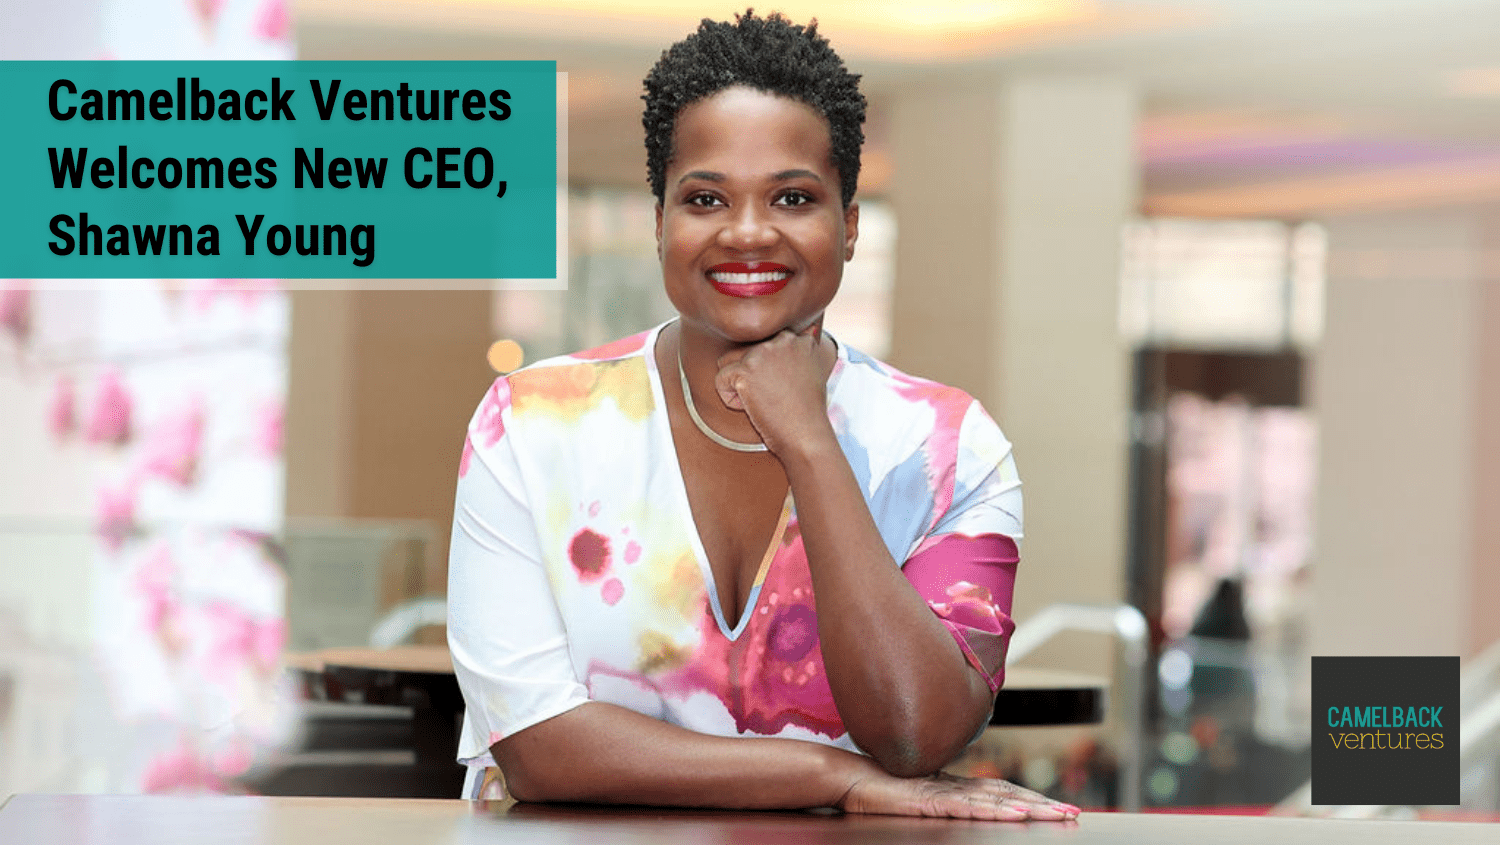 Shawna Young Joins Camelback Ventures as CEO